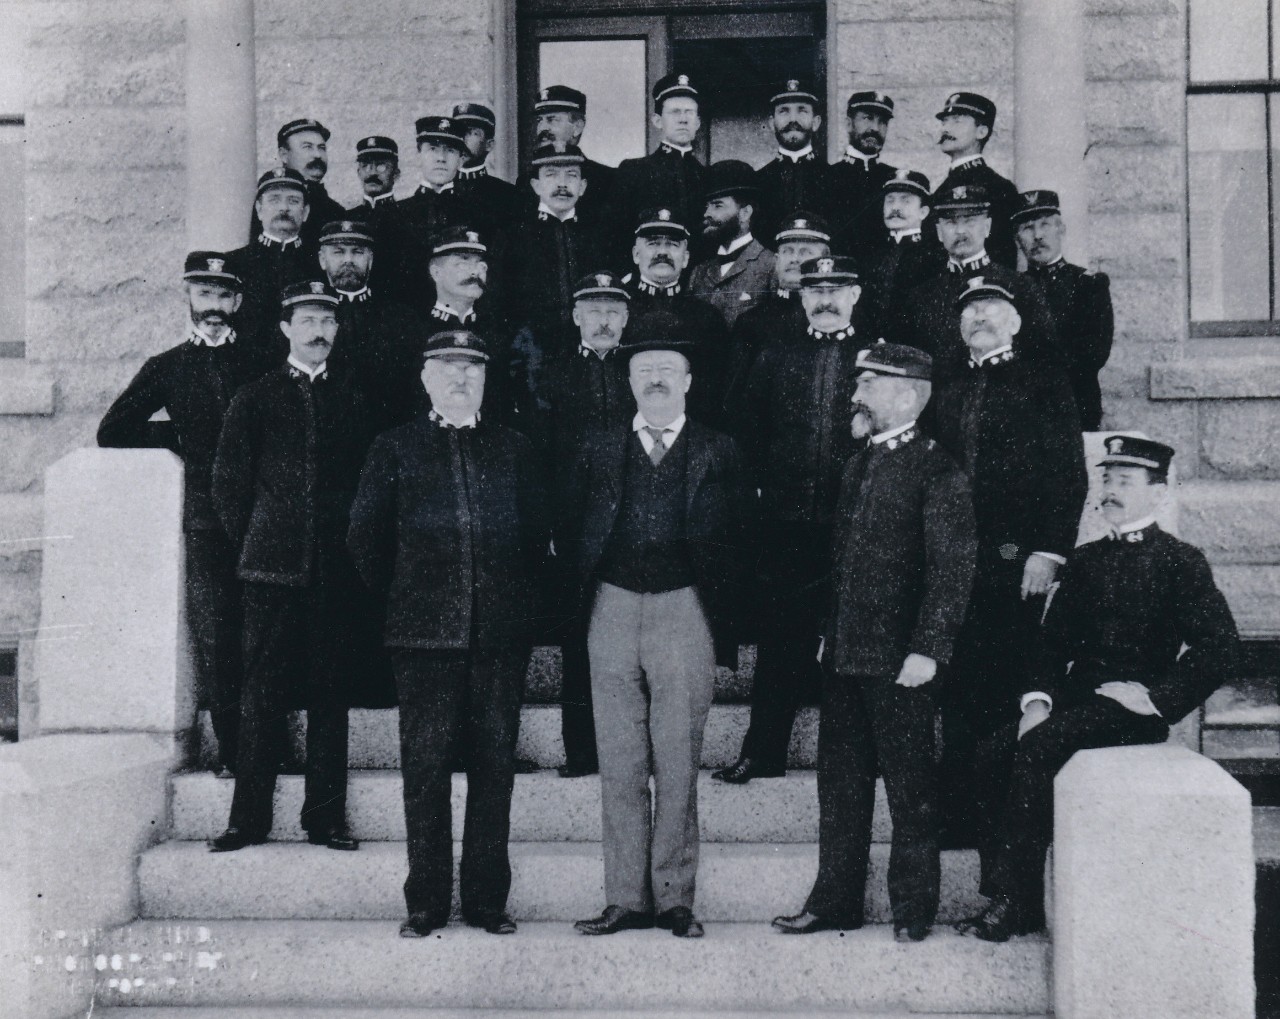 A group portrait including Asst. Secretary of the Navy Theodore Roosevelt who gave the opening address at the Naval War College in 1897.